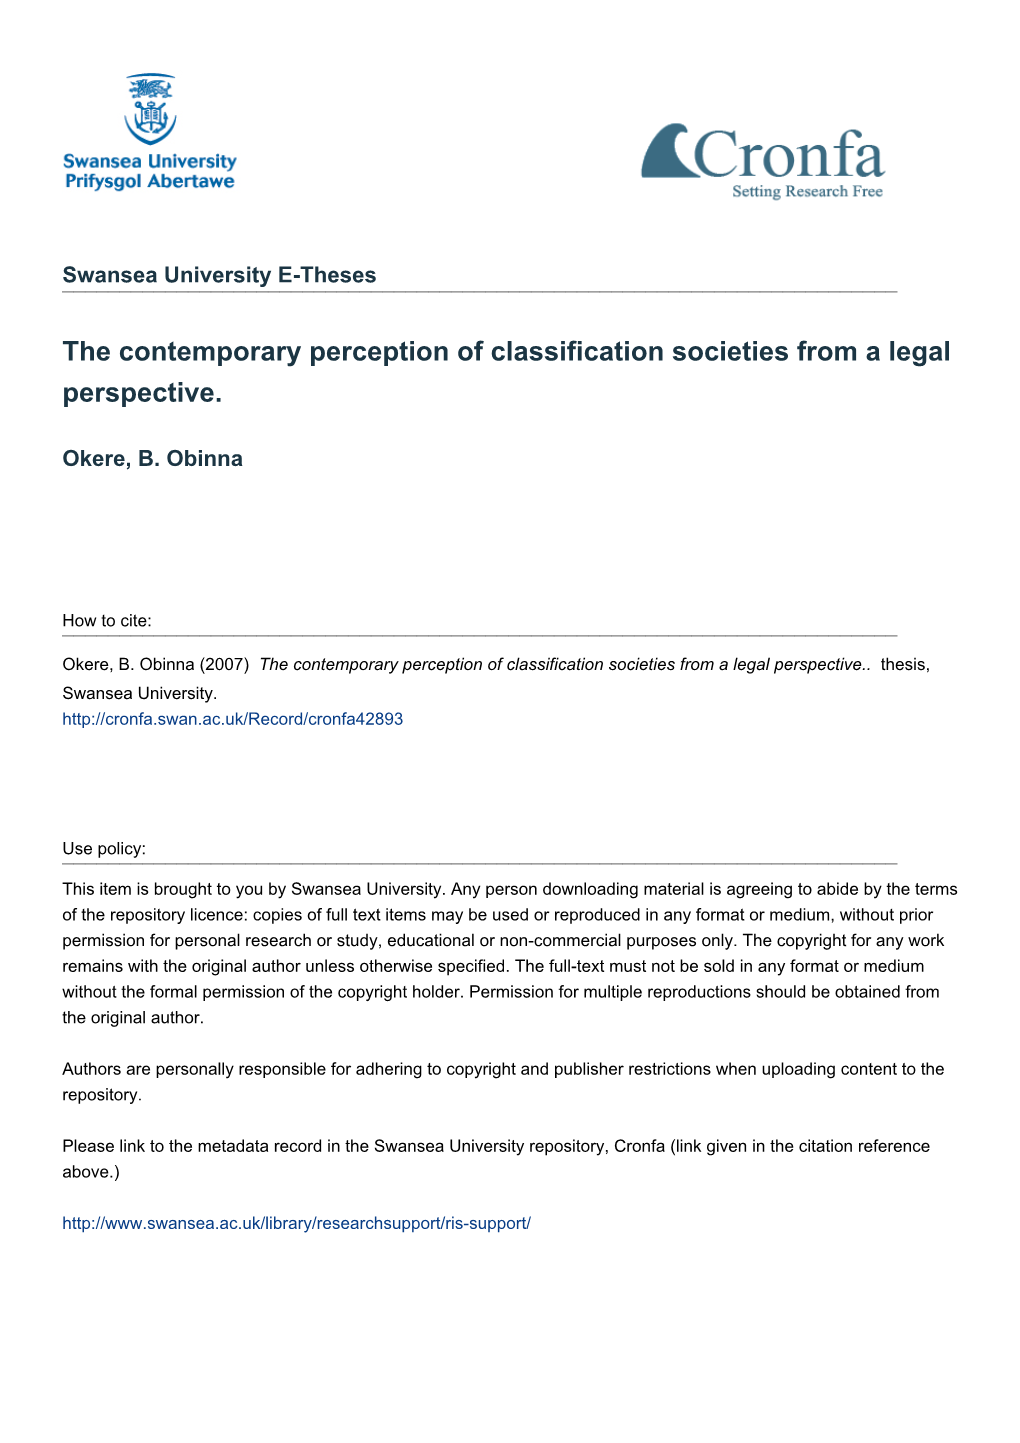 The Contemporary Perception of Classification Societies from a Legal Perspective